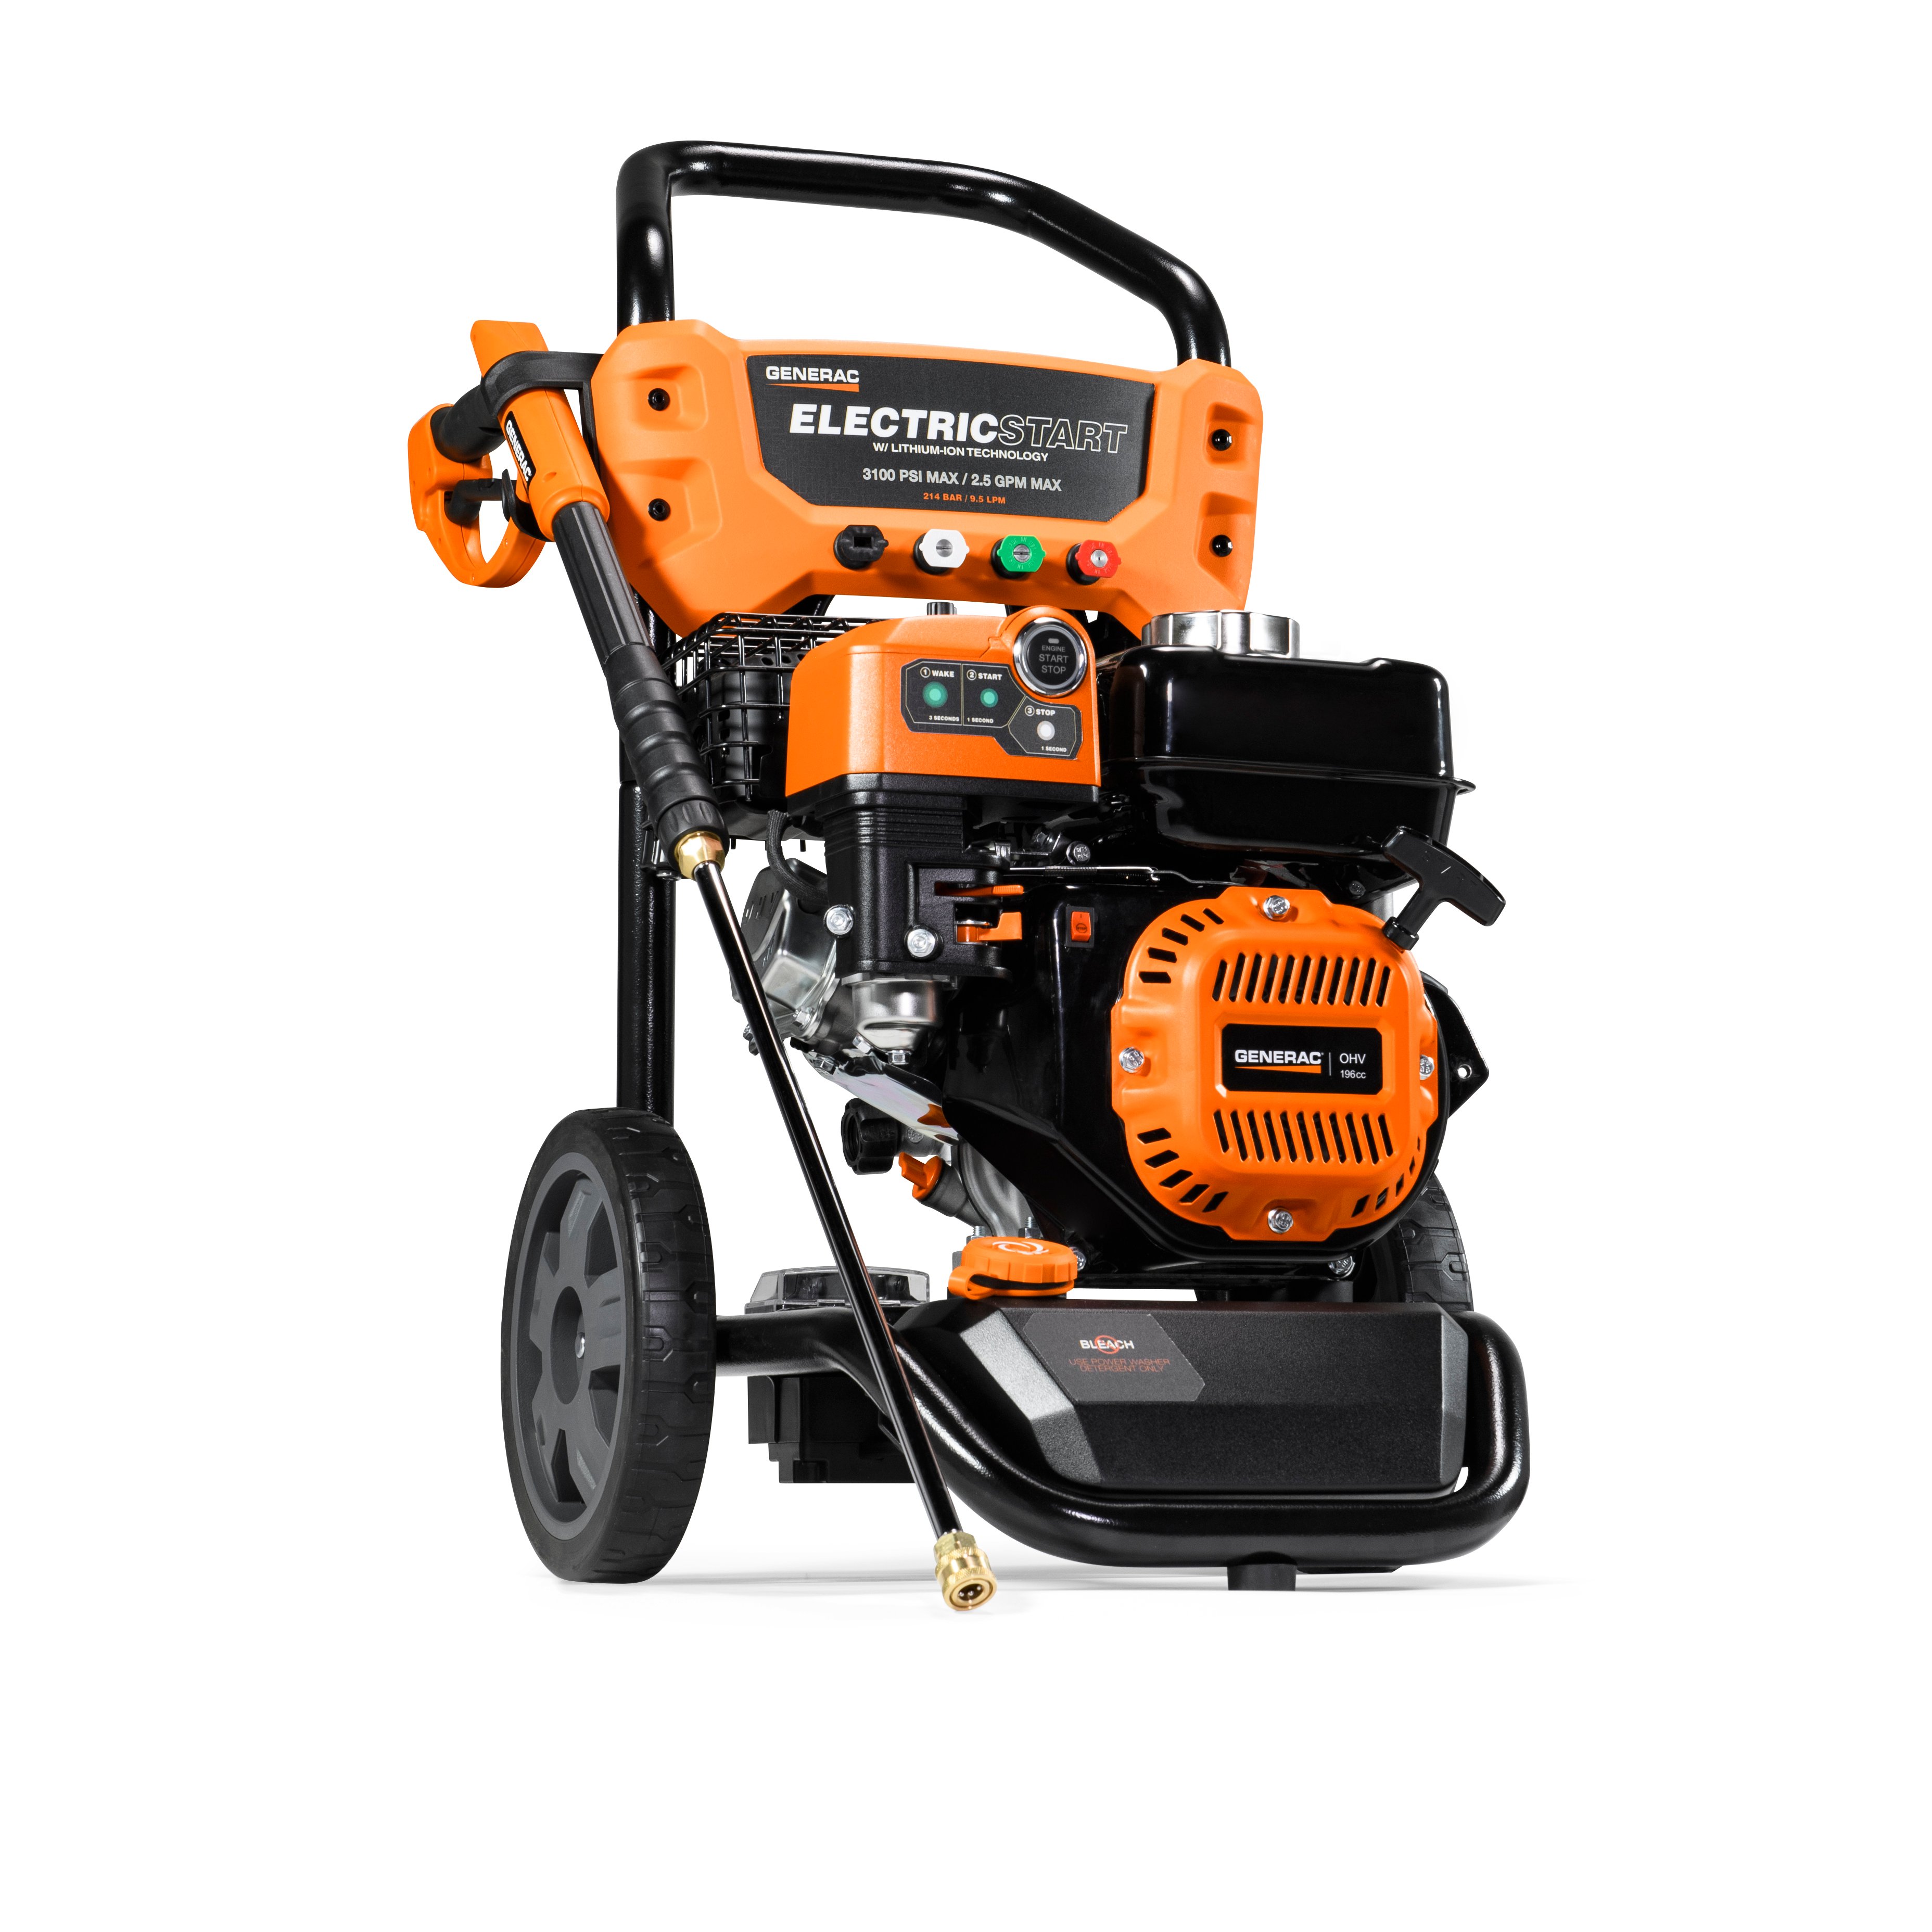 Pressure Washer 3100PSI Electric Product Image